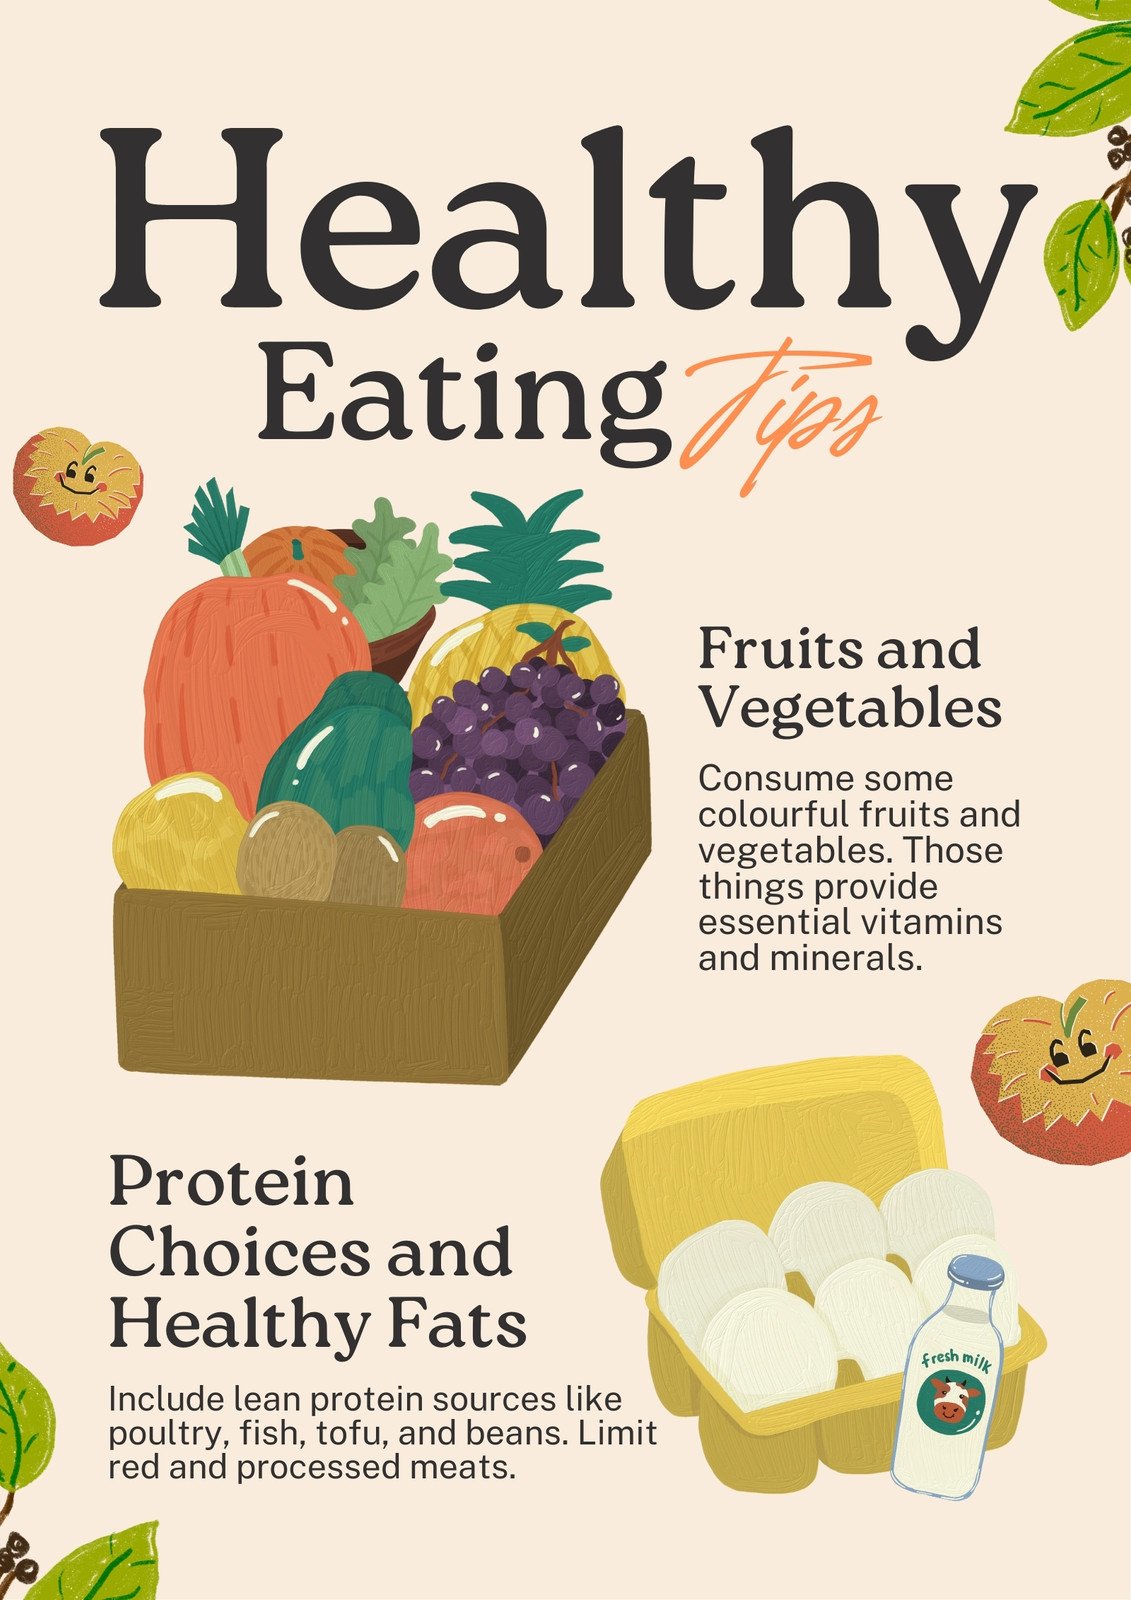 Cream Illustrative Healthy Eating Tips Poster